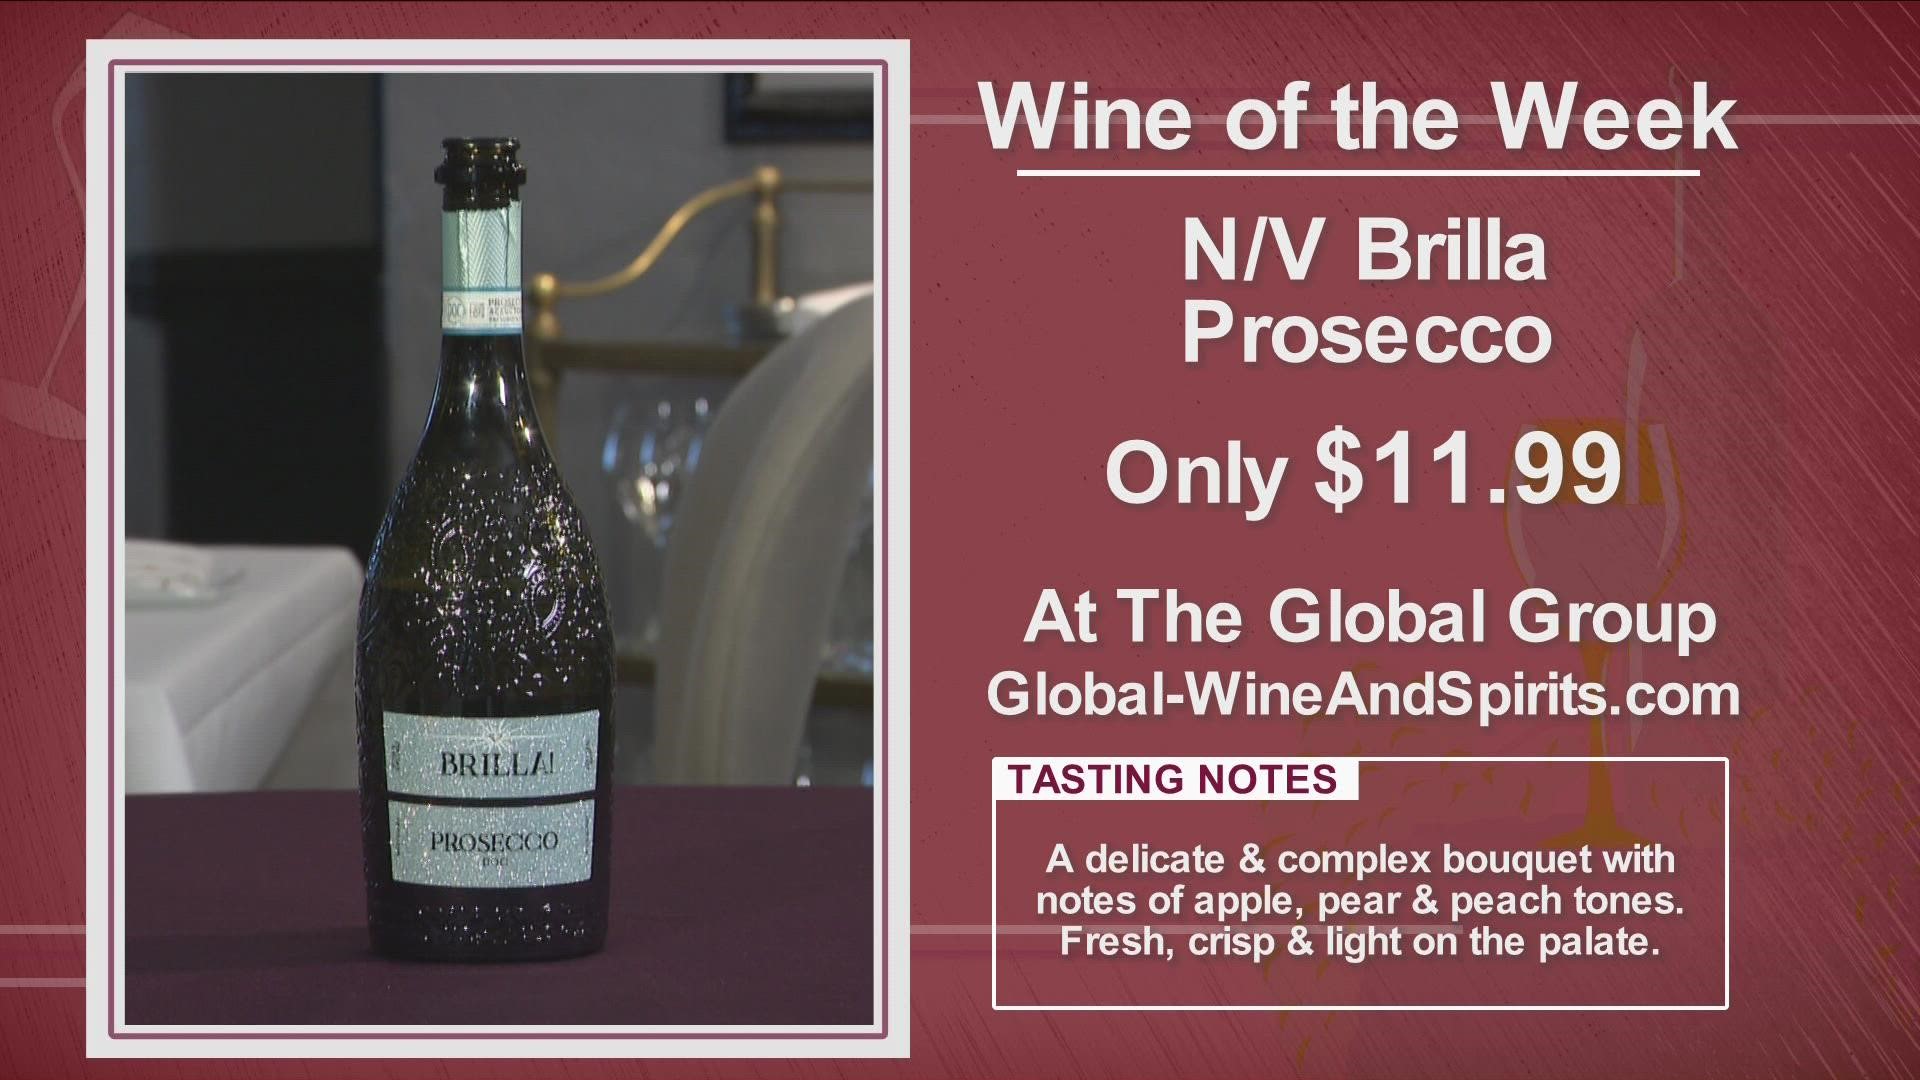 Kevin is joined by Ingrid Luongo to try the N/V Brilla Prosecco 